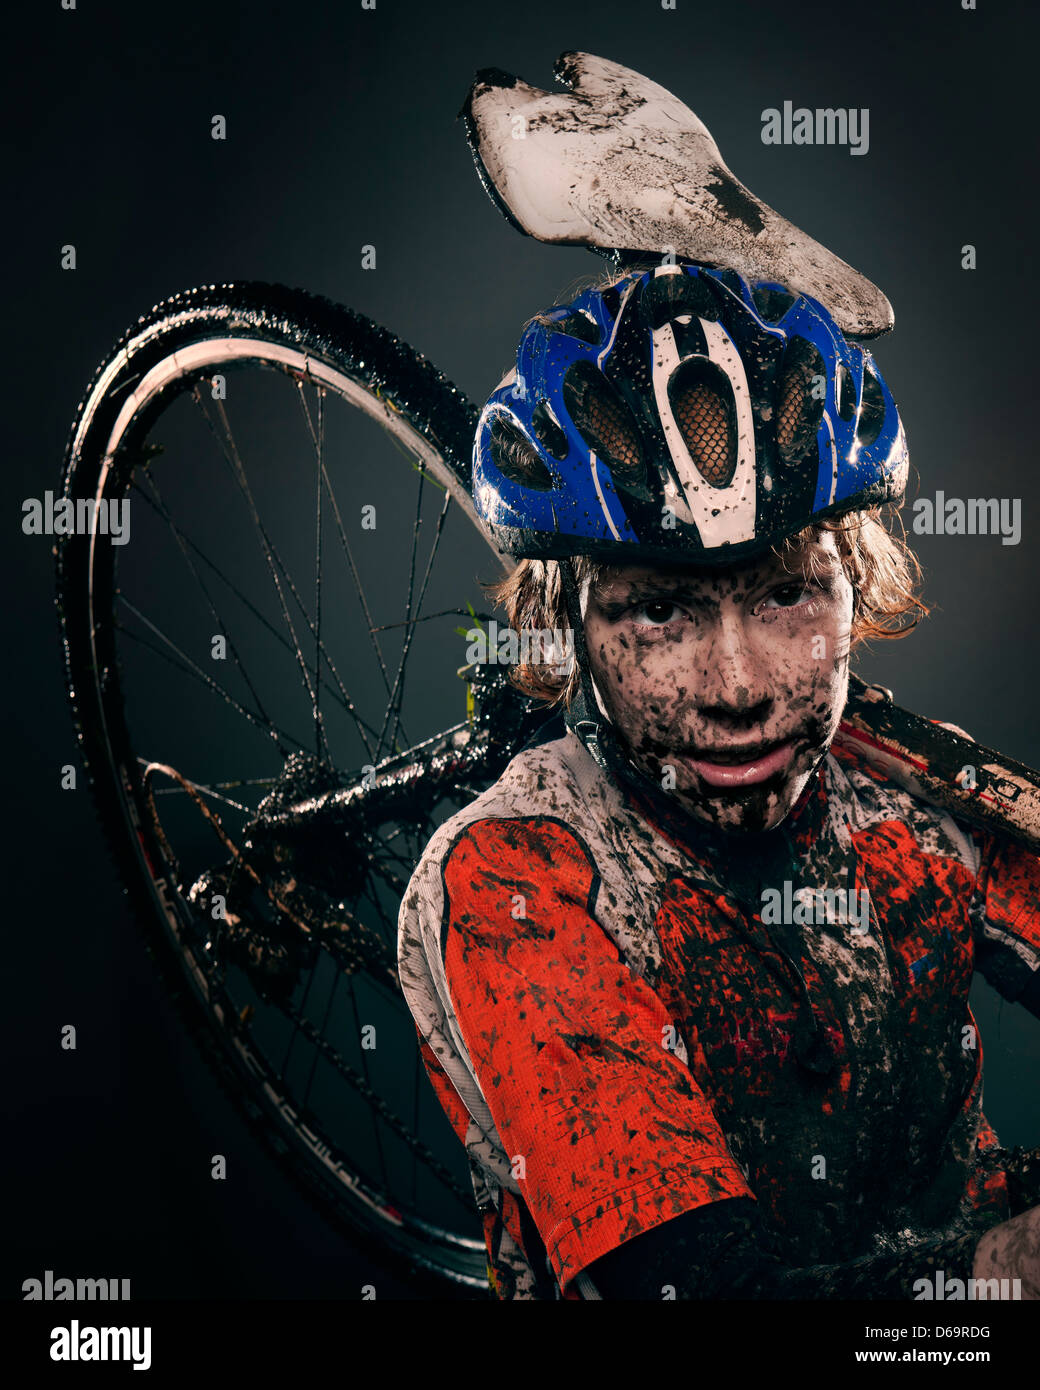 Mud splattered cyclist carrying bicycle Stock Photo